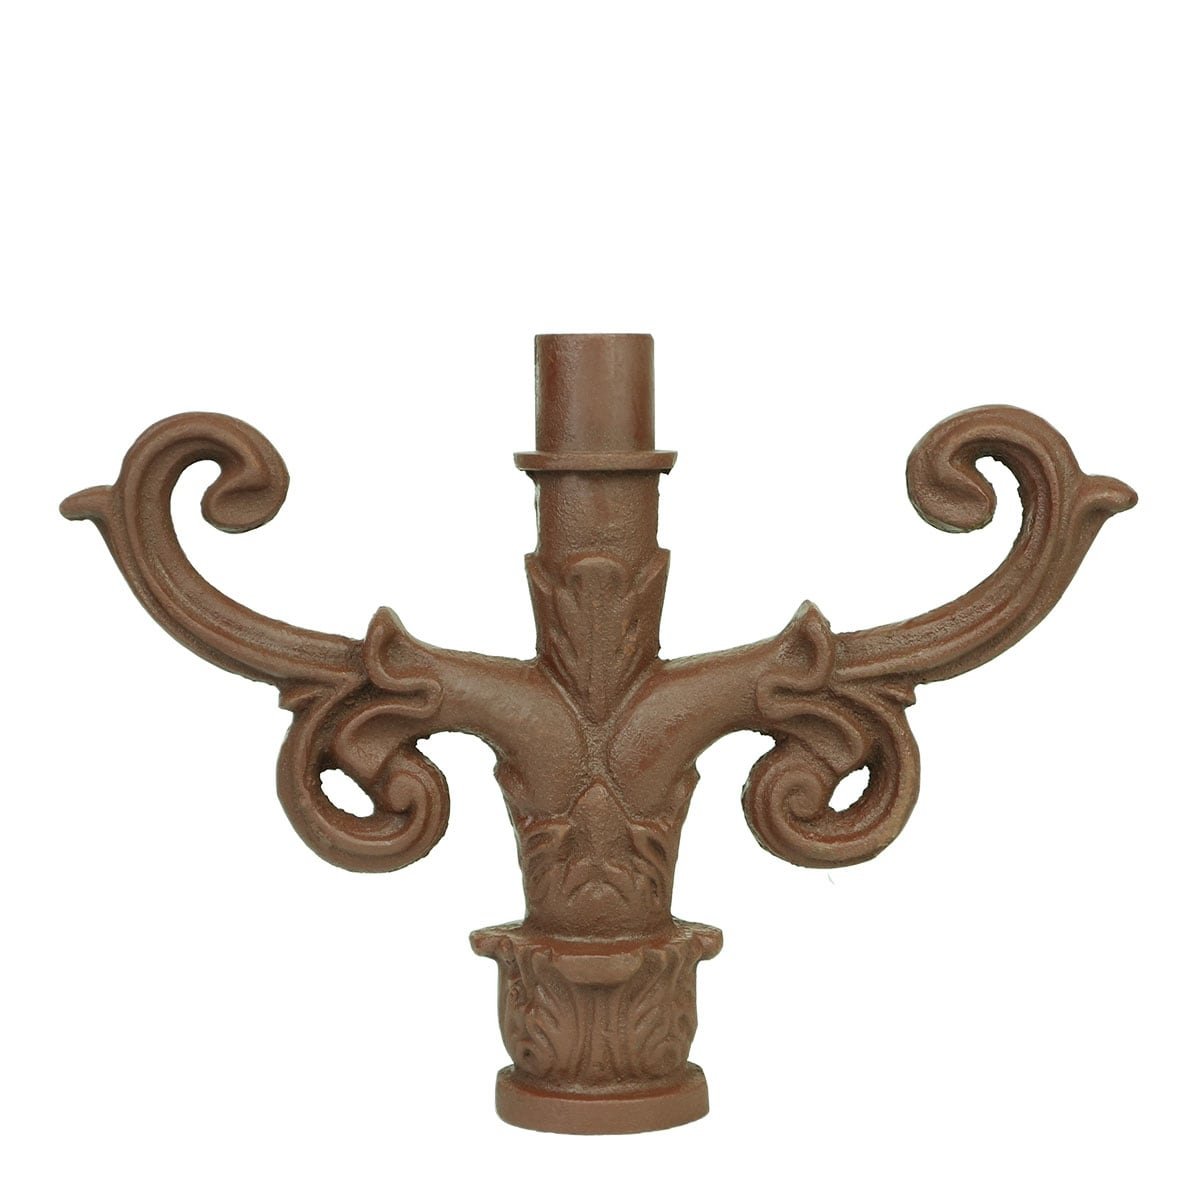 Ladder support cast iron with curls - 25 cm